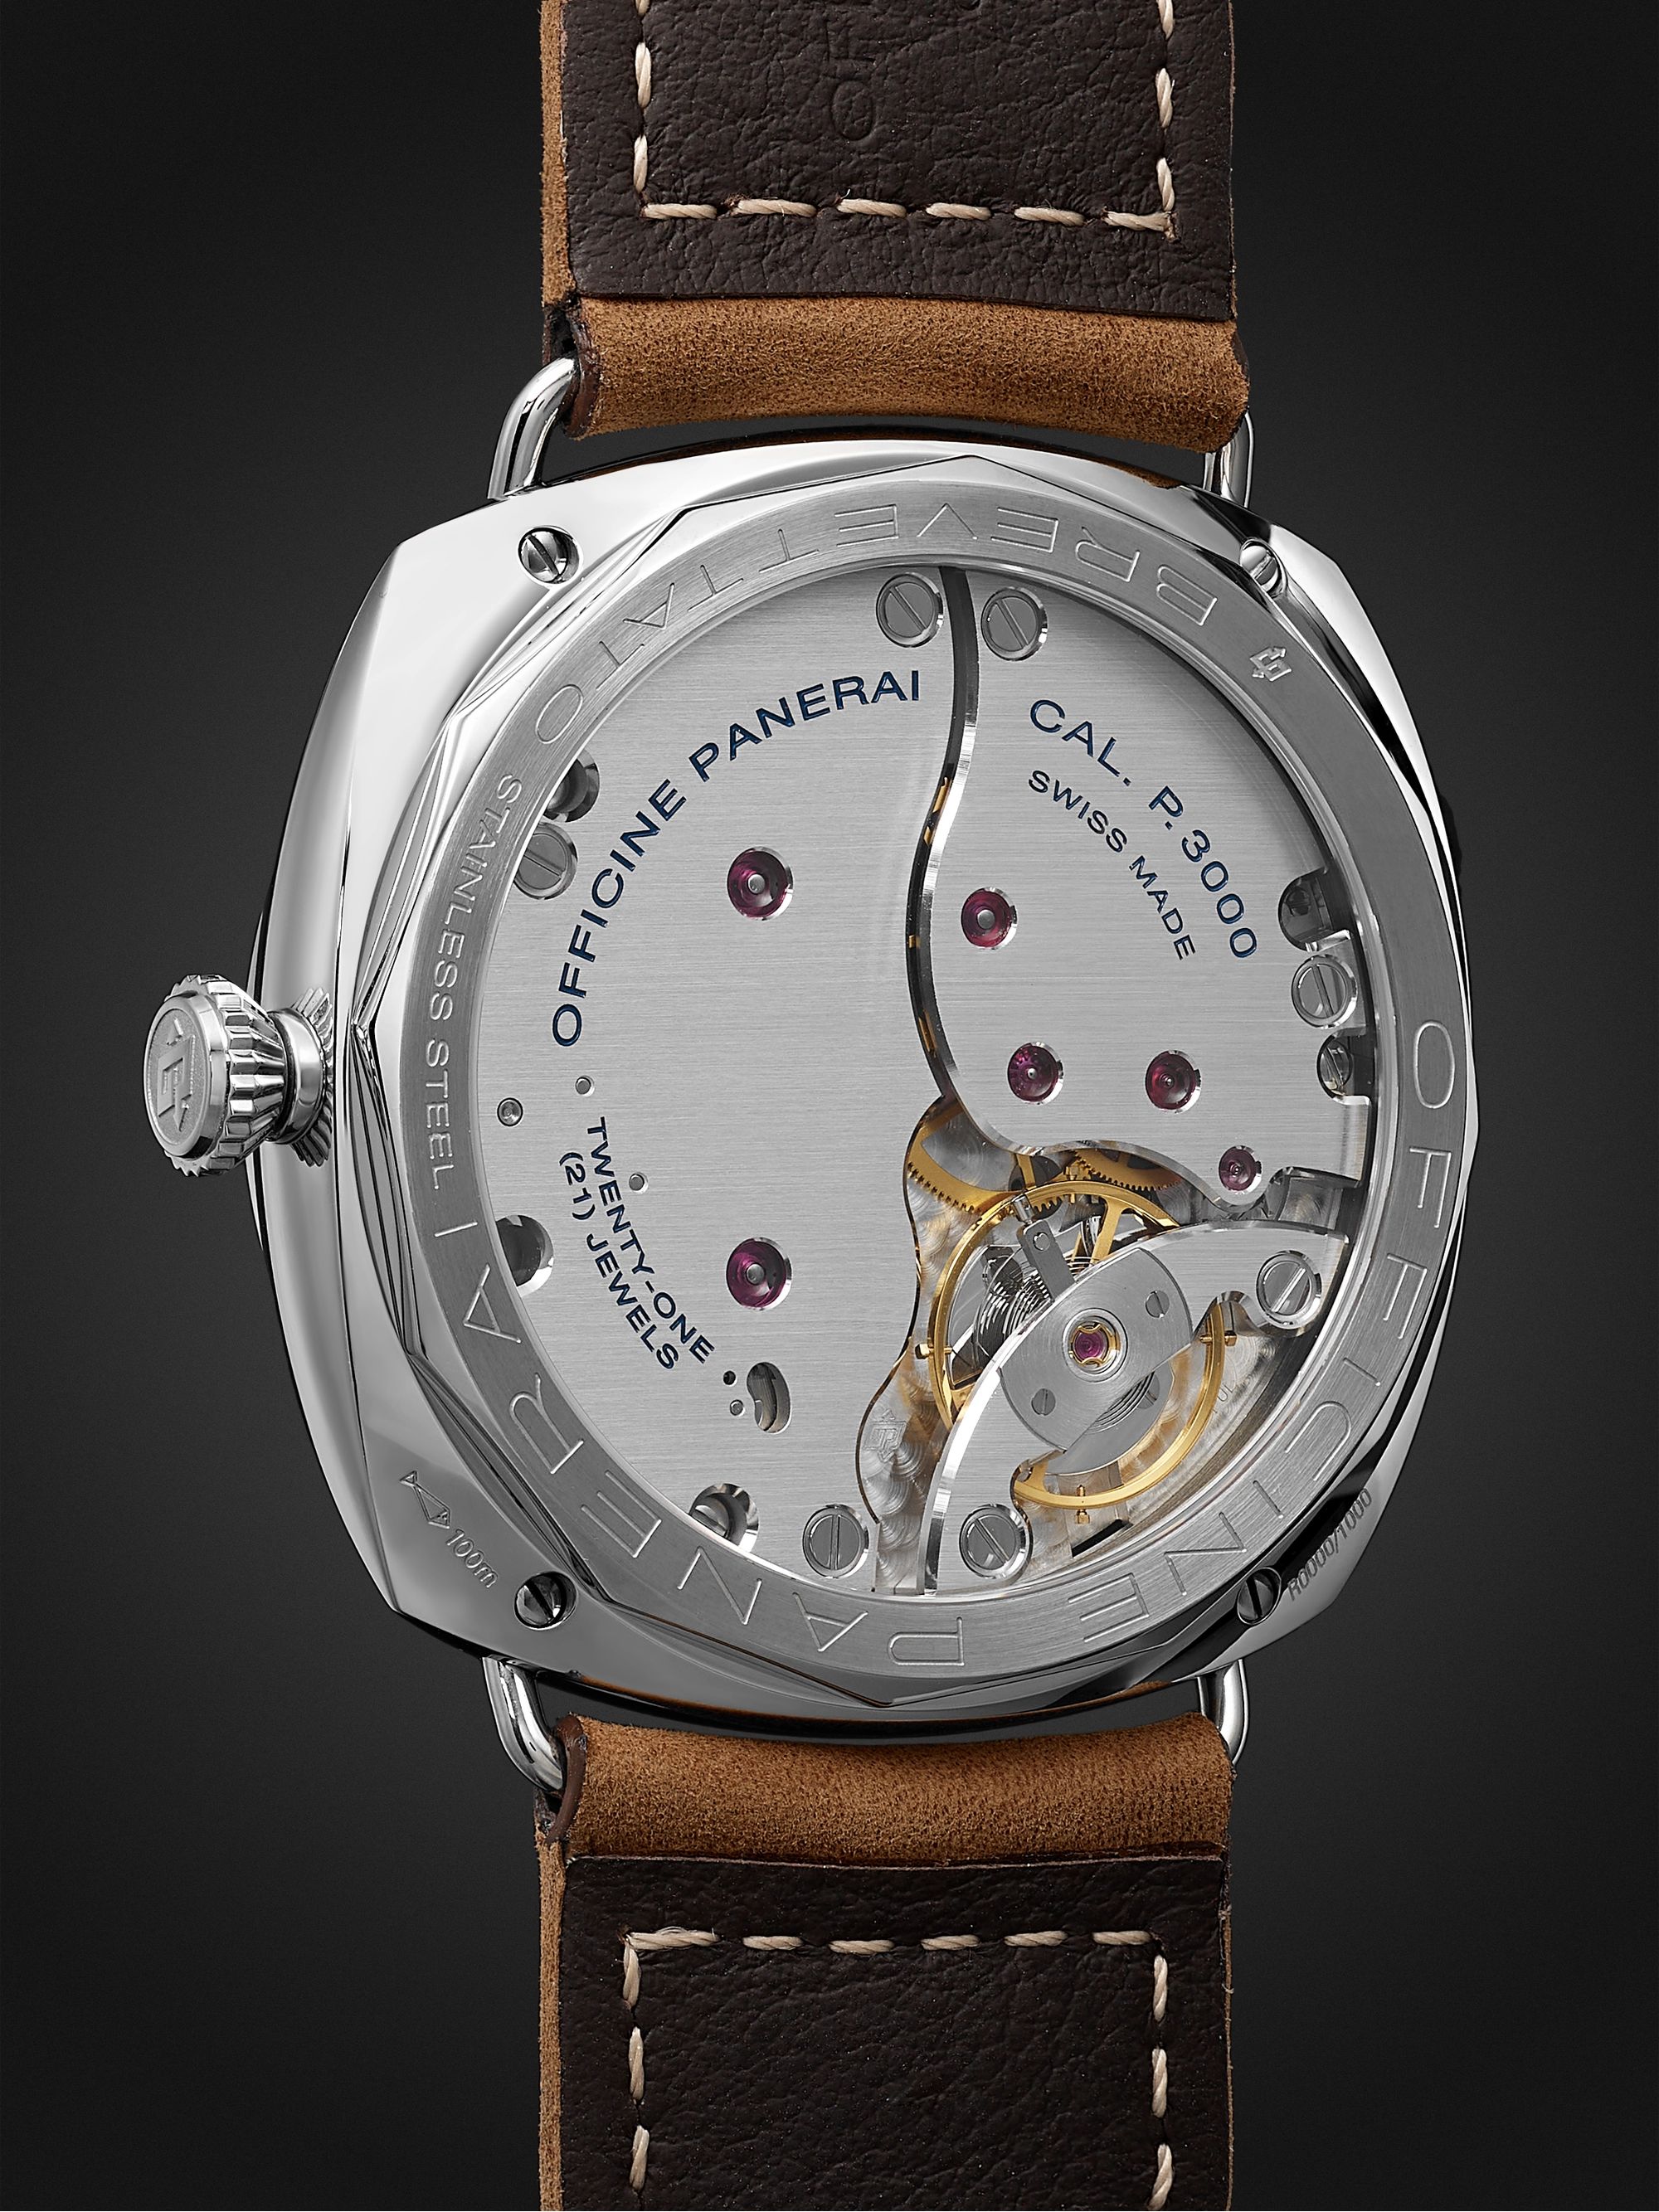 PANERAI Radiomir S.L.C. 3 Days Acciaio Hand-Wound 47mm Steel and Leather Watch, Ref. No. PAM00425